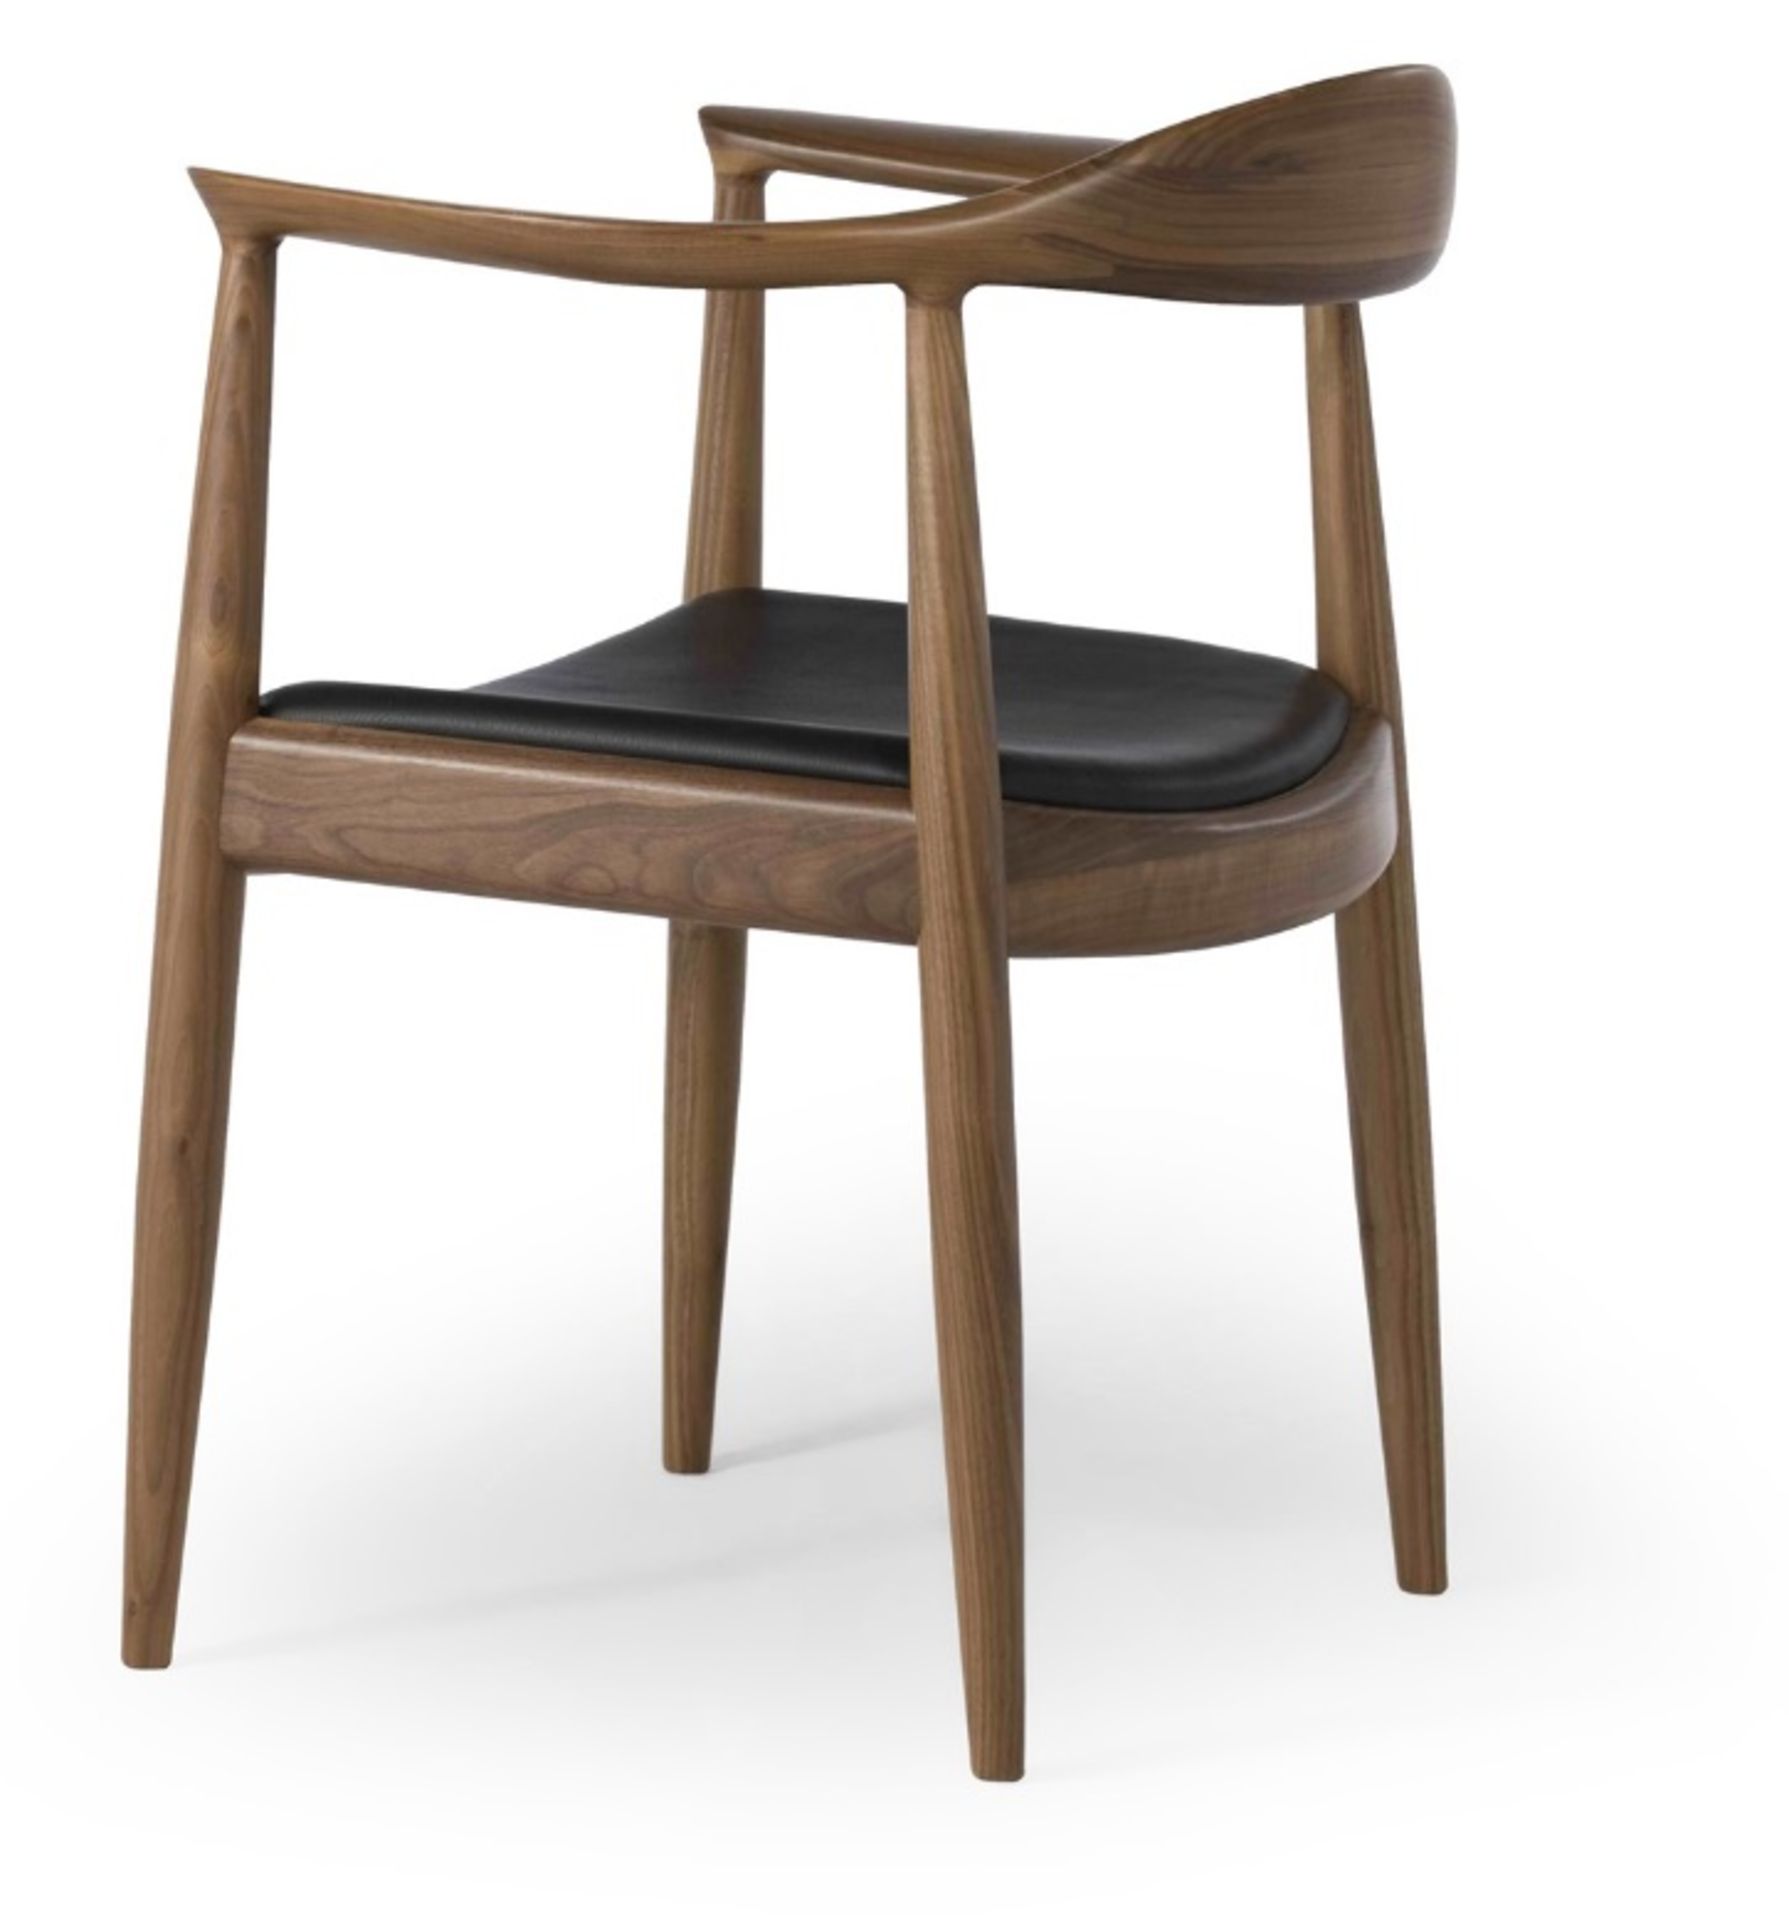 4 x Hans-j Wegner Inspired Dining Chairs In Walnut - New & Boxed- CL508 - Location: Altrincham WA14 - Image 4 of 5